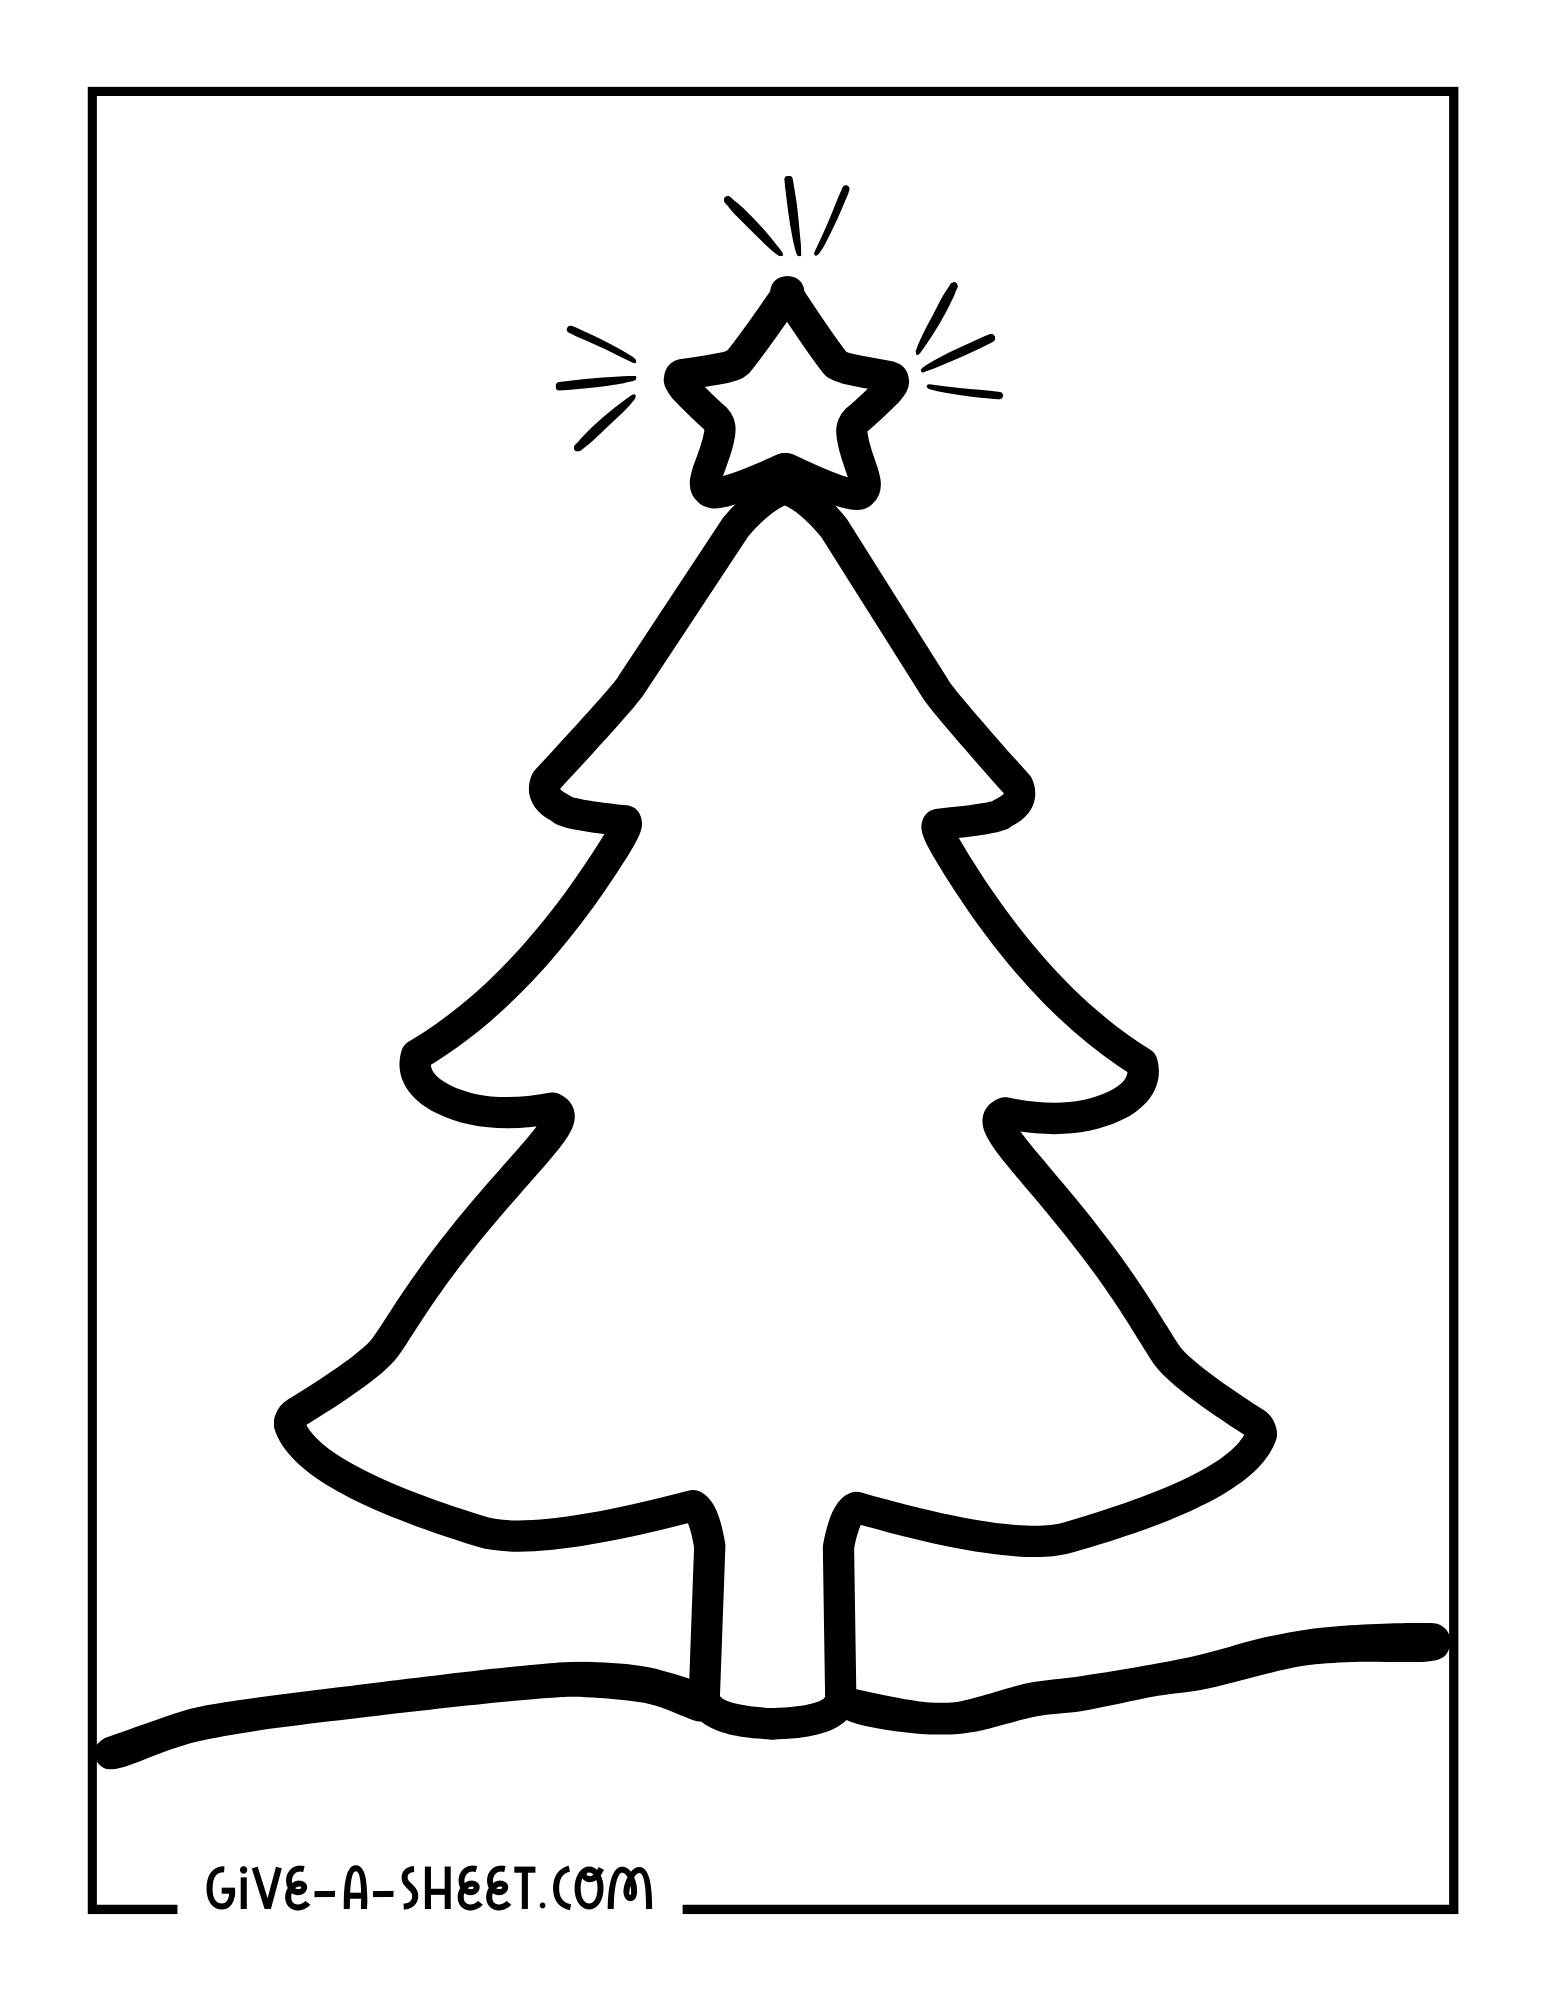 Easy Christmas trees outline to color in for preschoolers.